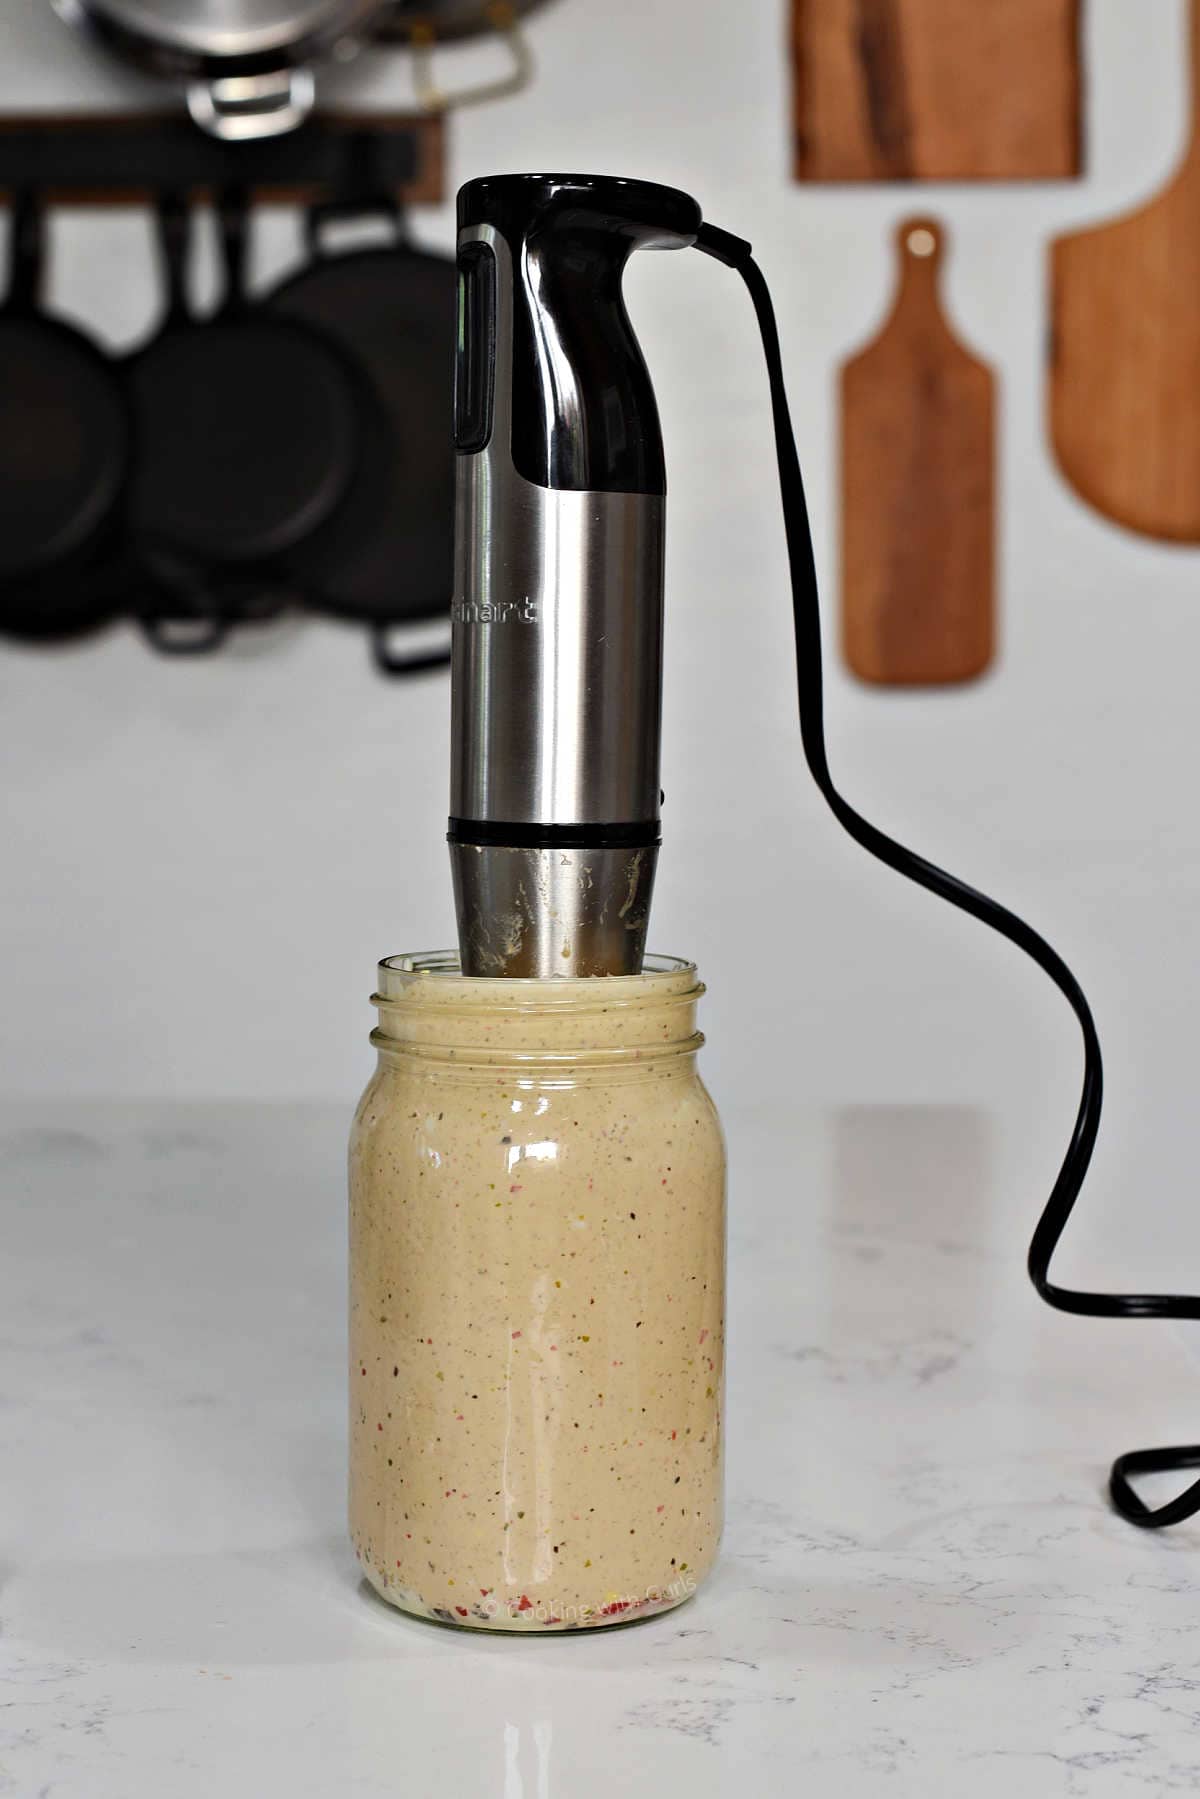 Thousand island dressing in a mason jar being blended with a stick blender.